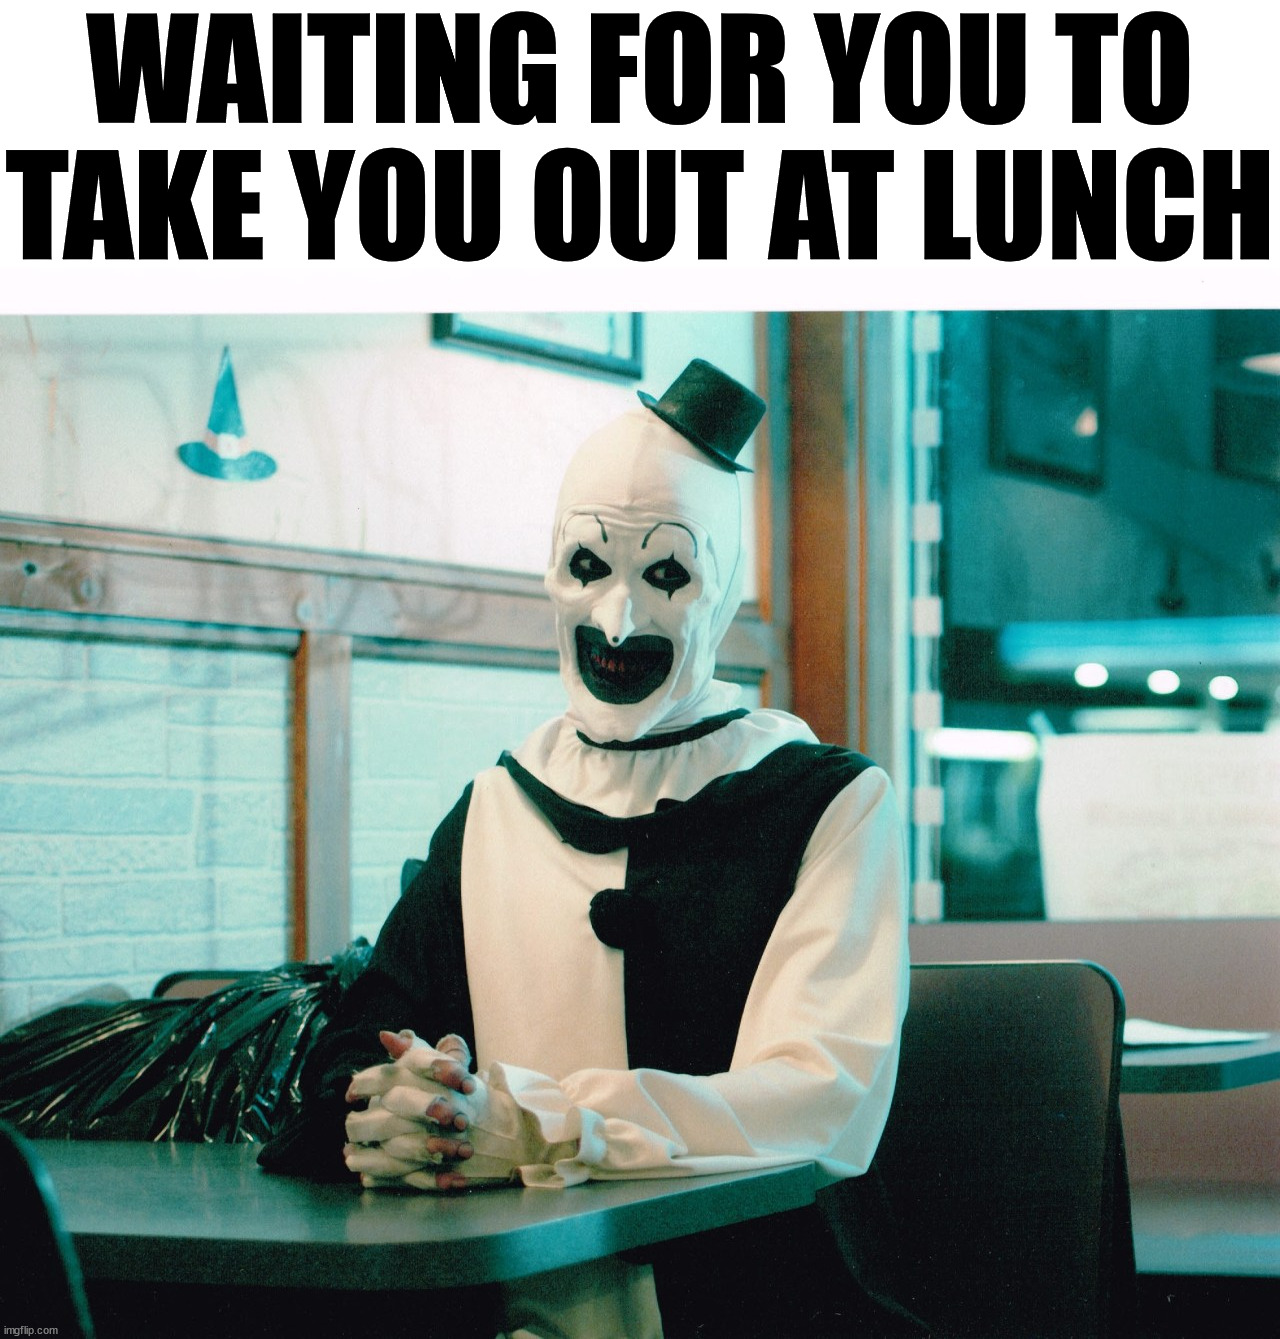 terrifier | WAITING FOR YOU TO TAKE YOU OUT AT LUNCH | image tagged in terrifier | made w/ Imgflip meme maker